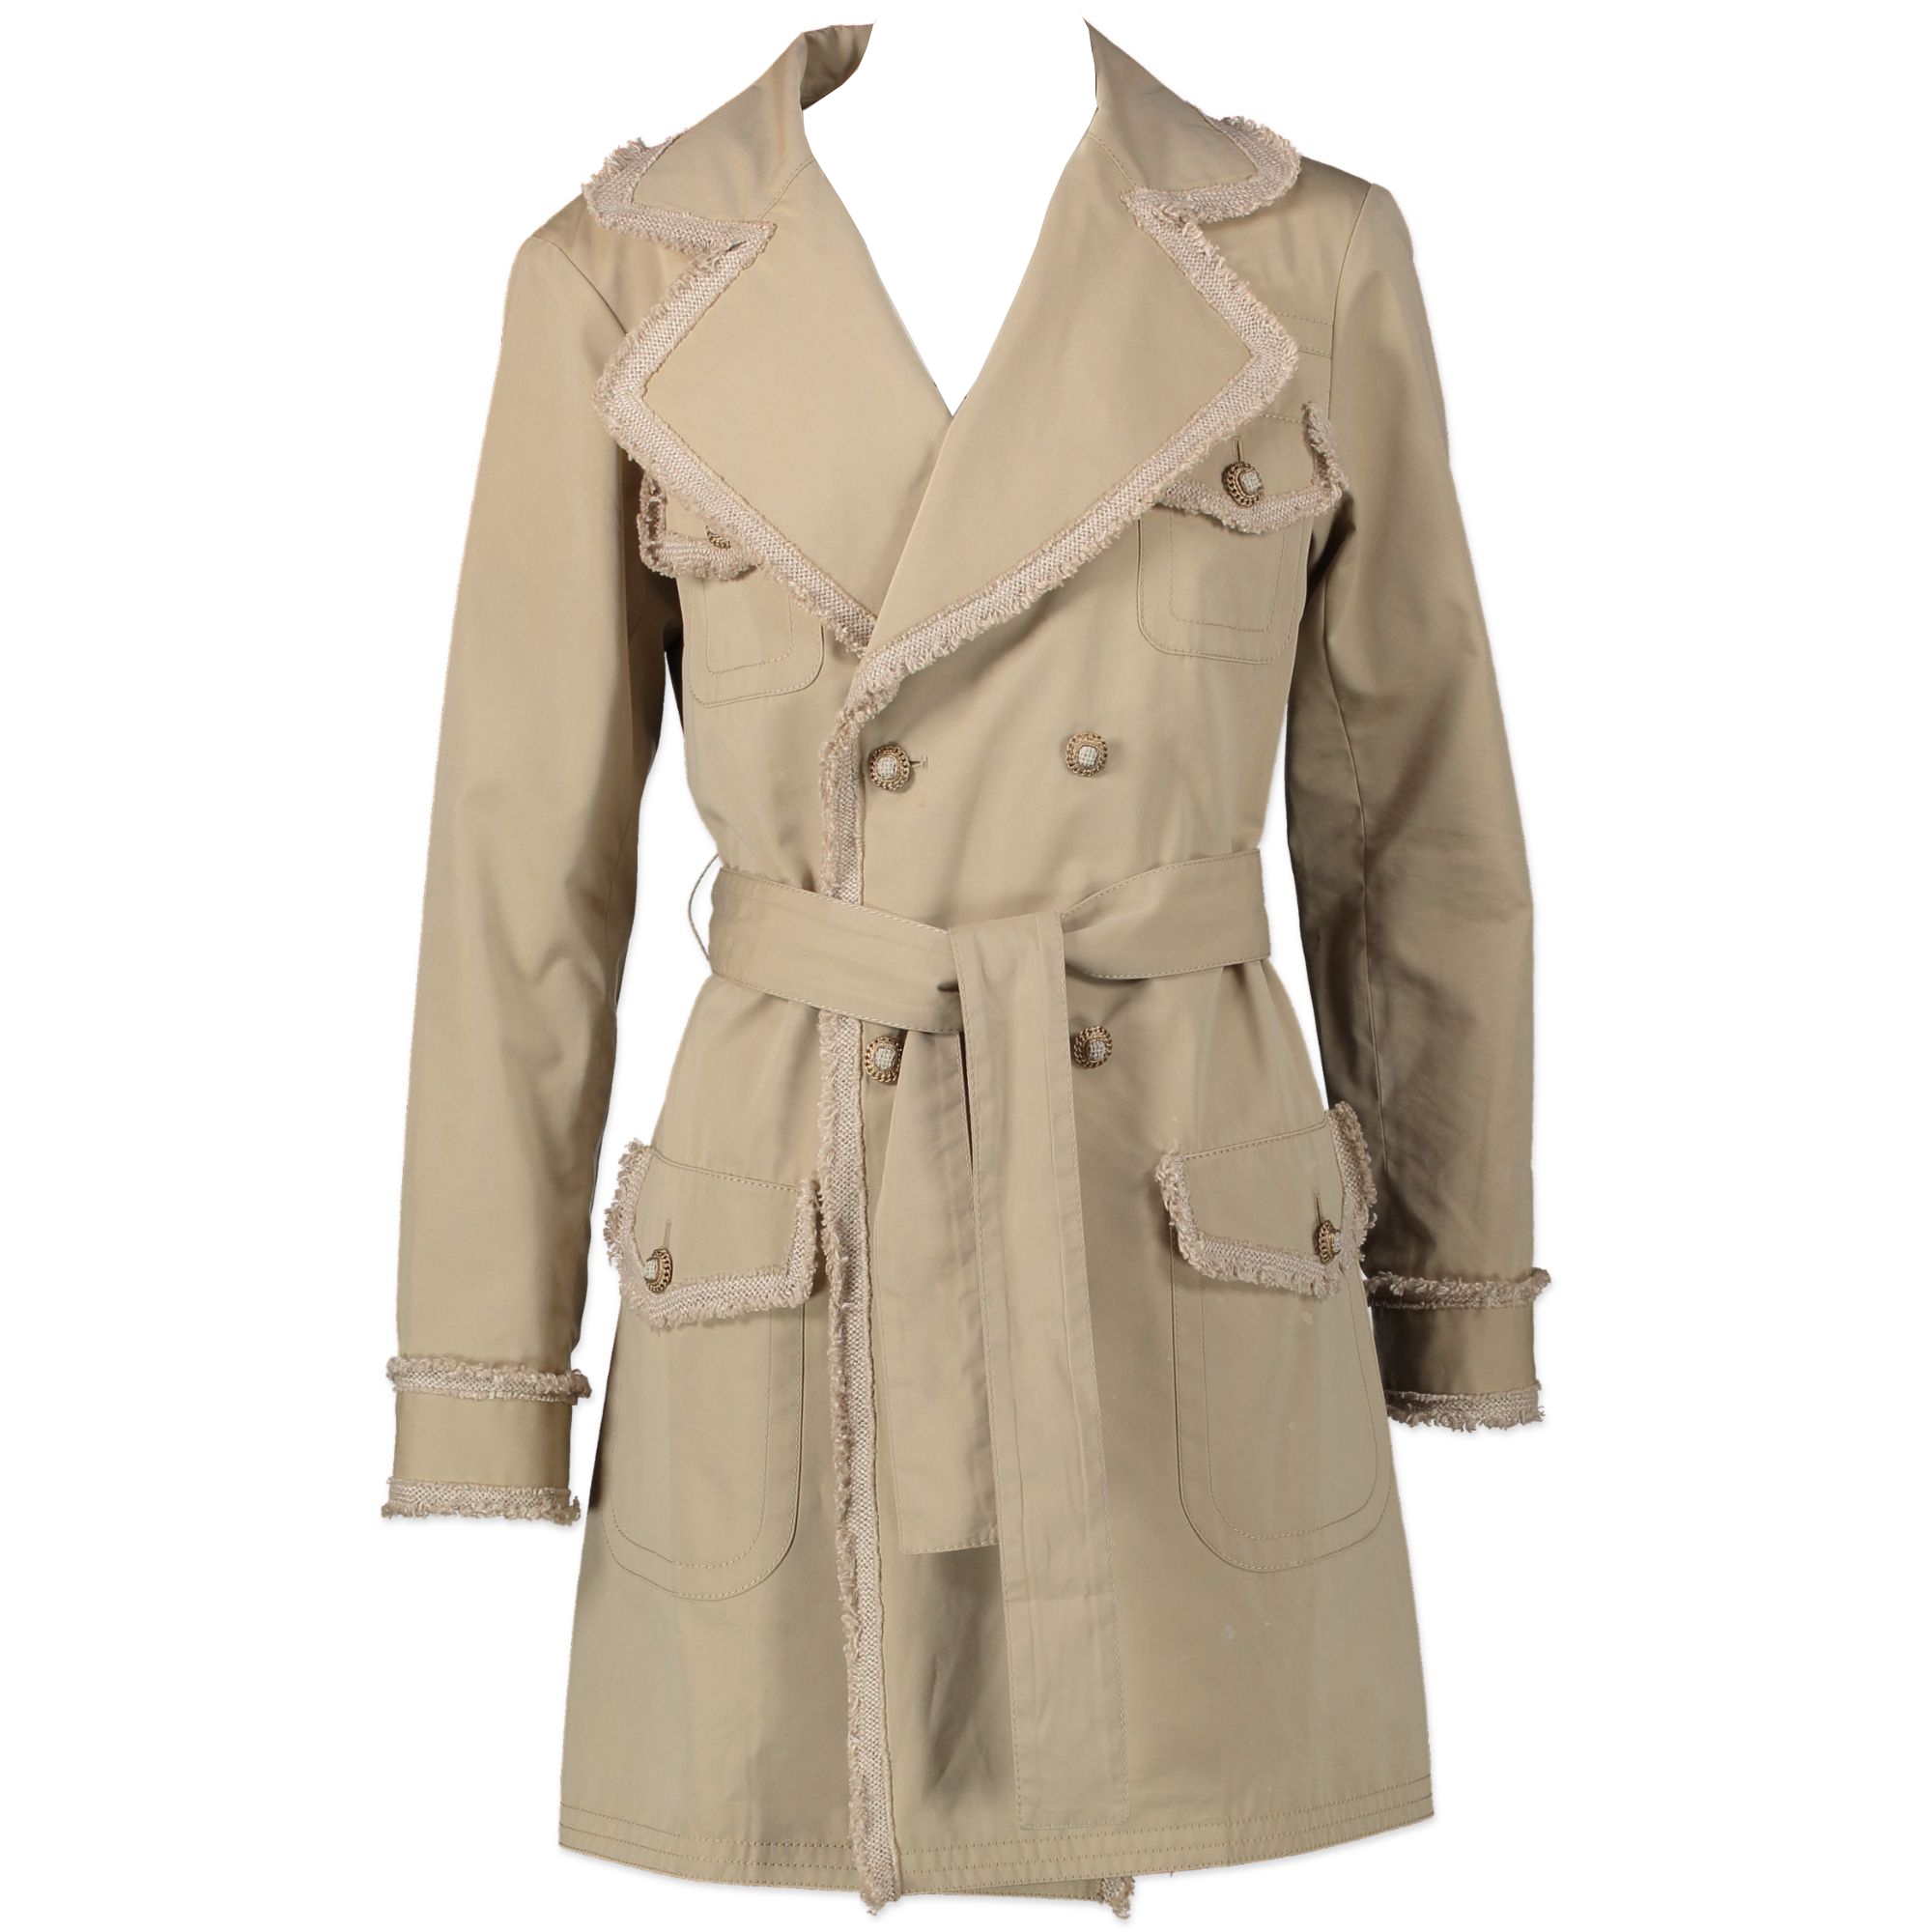 Sold at Auction: Chanel Trench Coat with Tweed Trim